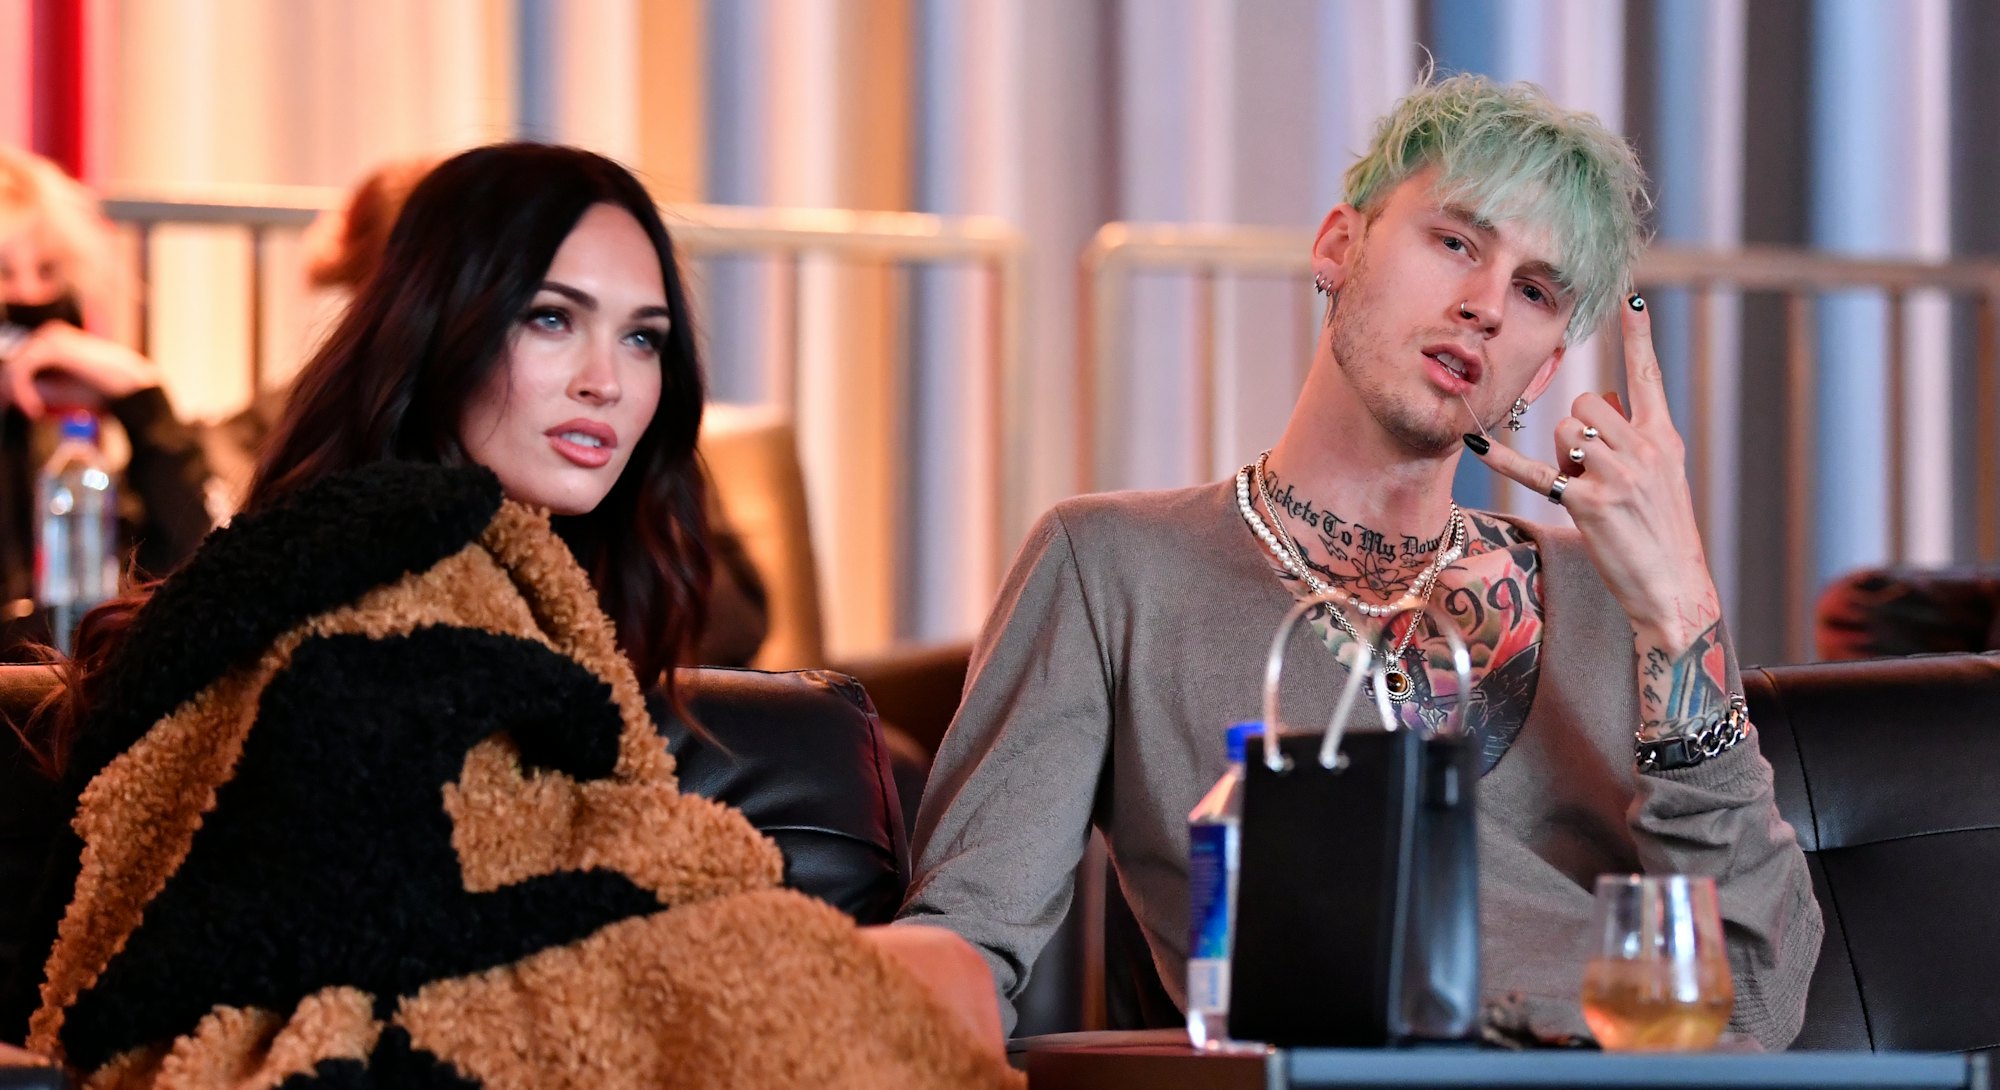 LAS VEGAS, NEVADA - MARCH 27: Machine Gun Kelly and Megan Fox are seen in attendance during the UFC ...